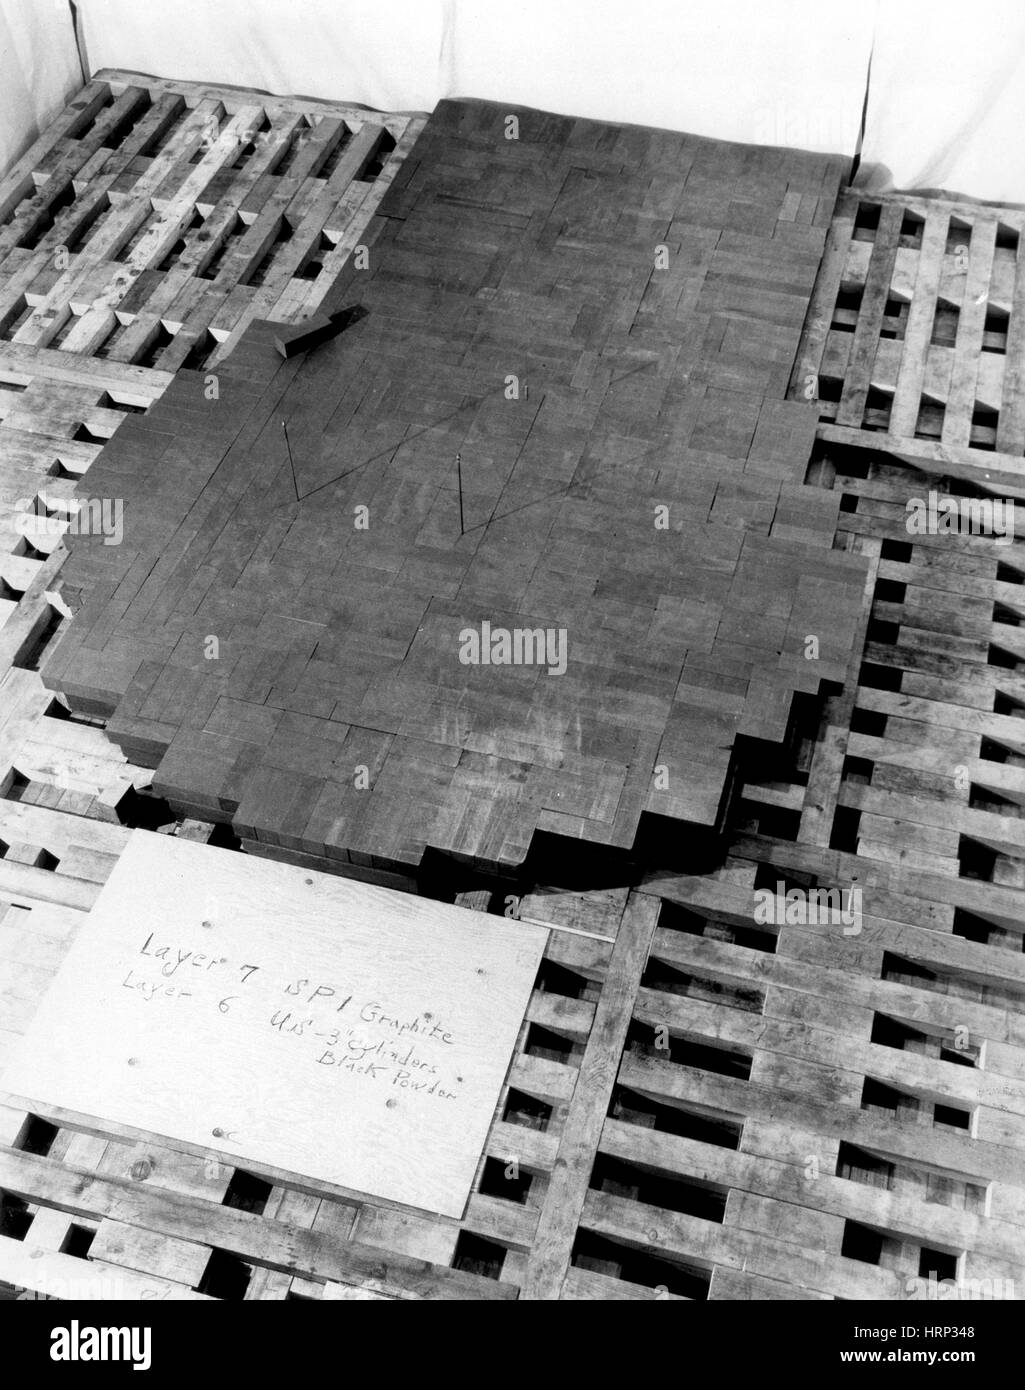 CP-1 during assembly. Photograph shows the 7th layer of graphite blocks and edges of the 6th layer. Chicago Pile-1 (CP-1) was the world's first artificial nuclear reactor. The construction of CP-1 was part of the Manhattan Project, and was carried out by the Metallurgical Laboratory at the University of Chicago. Stock Photo